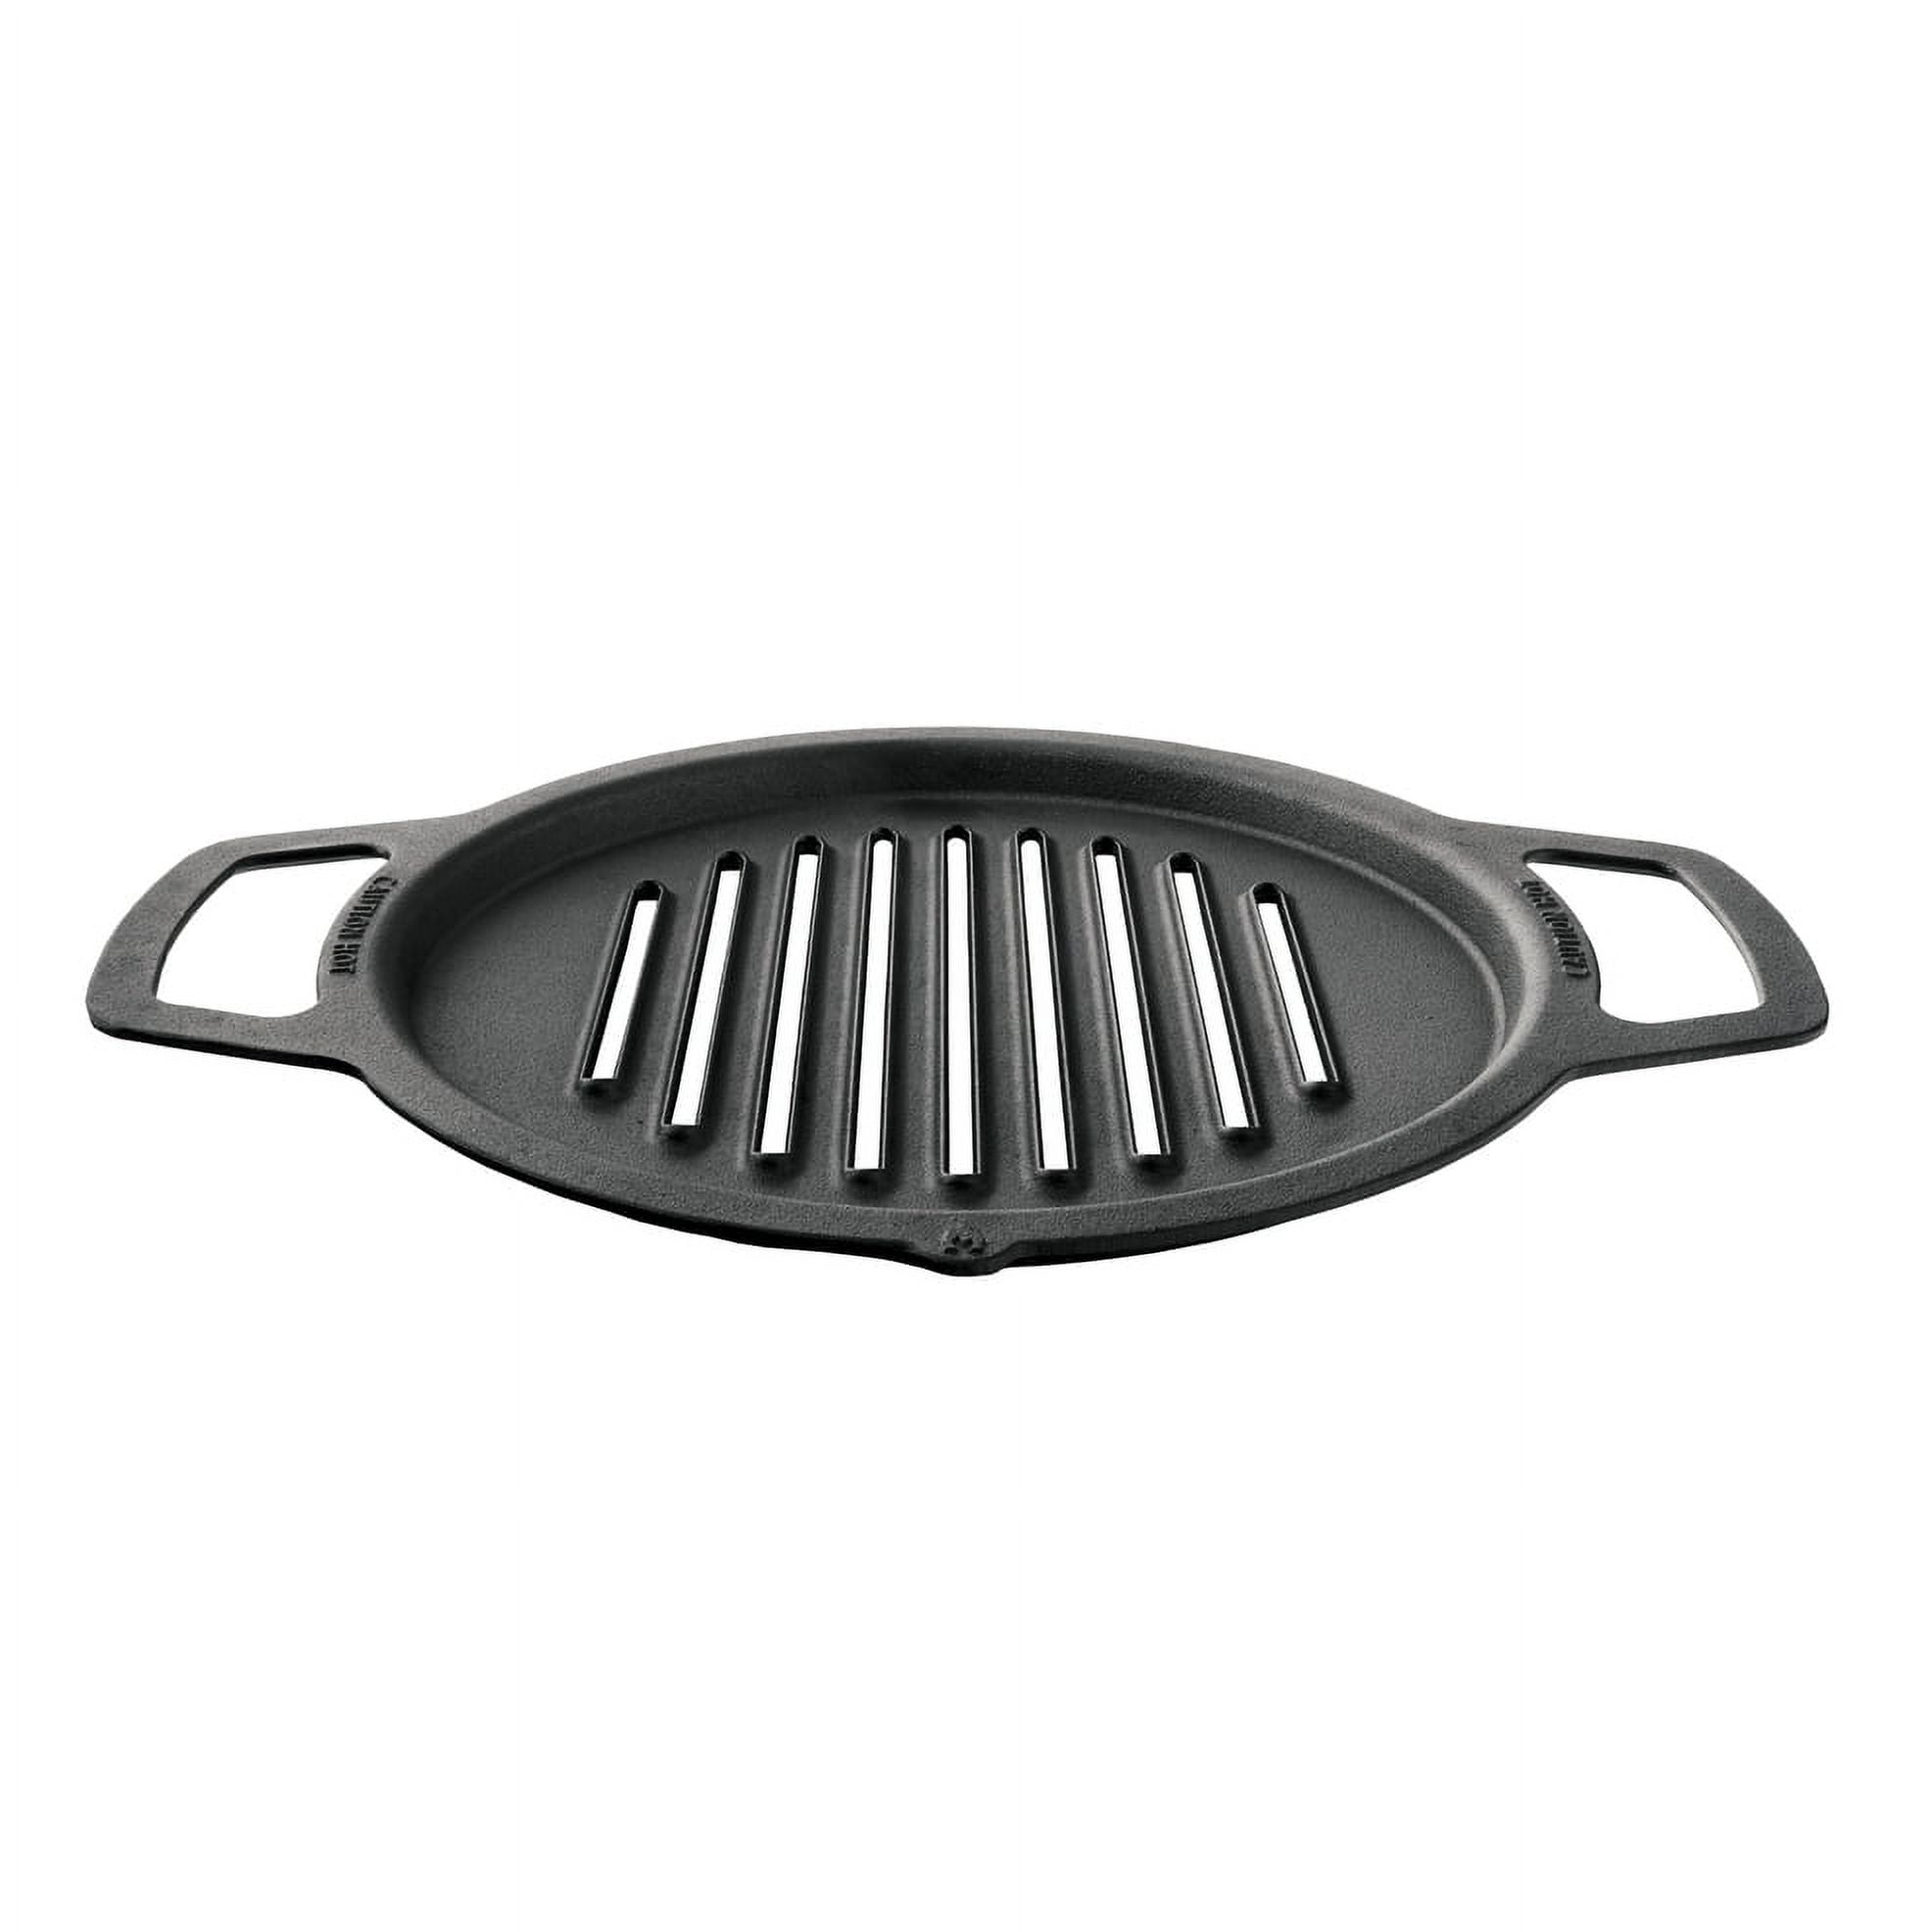 Solo Stove Small Cast Iron Grill Top for the Ranger Wood Burning Fire Pit